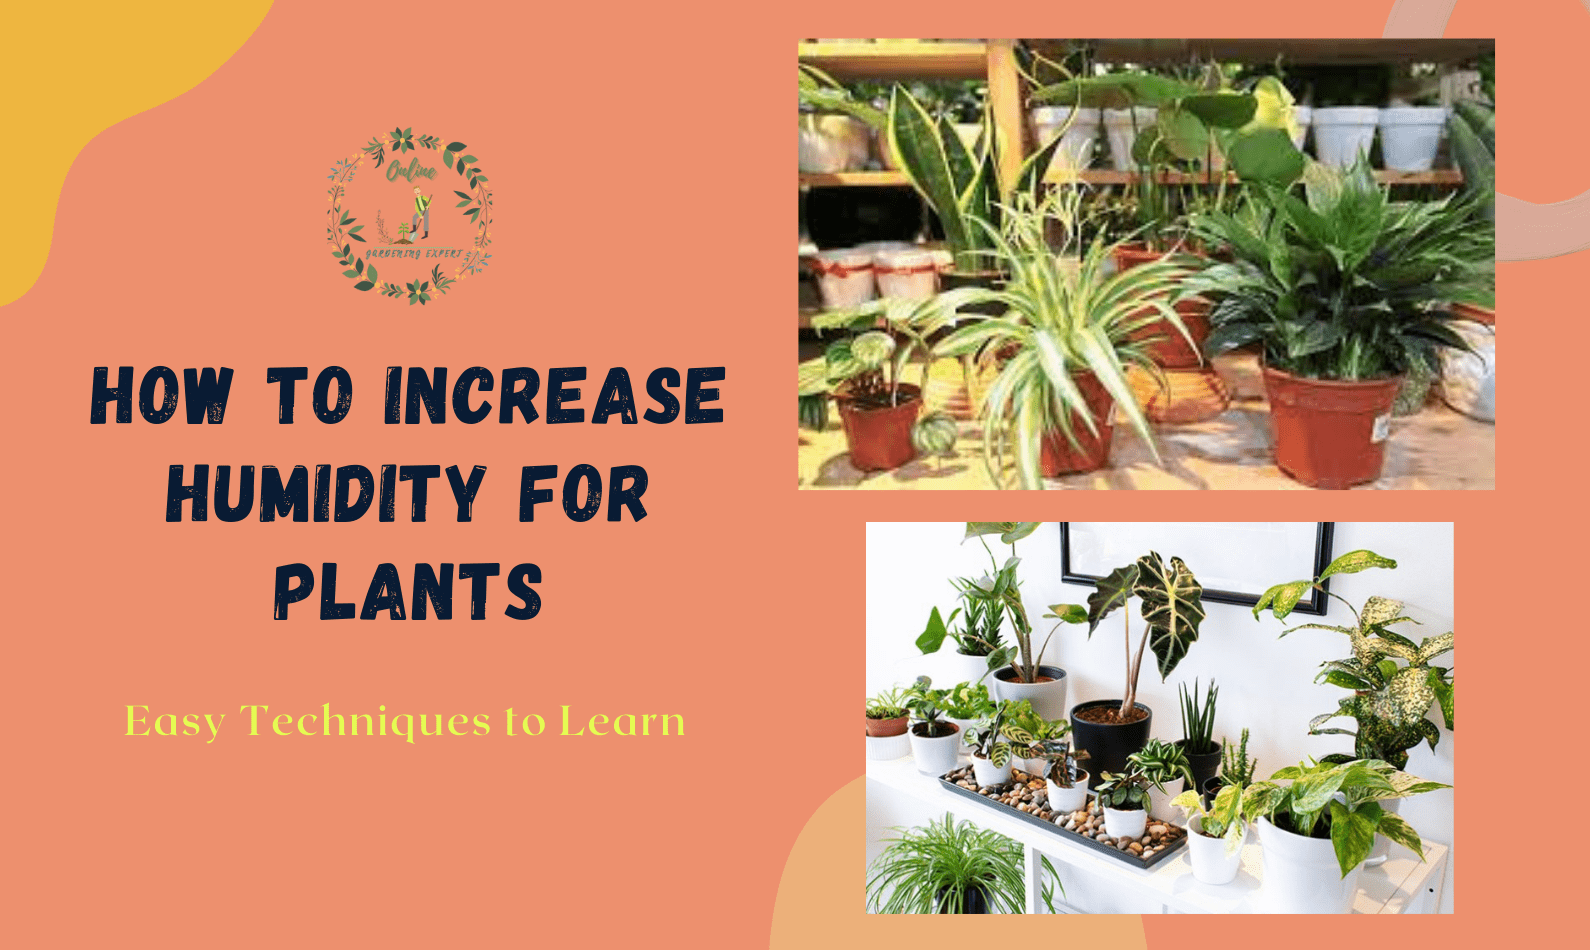 How to Increase Humidity for Plants